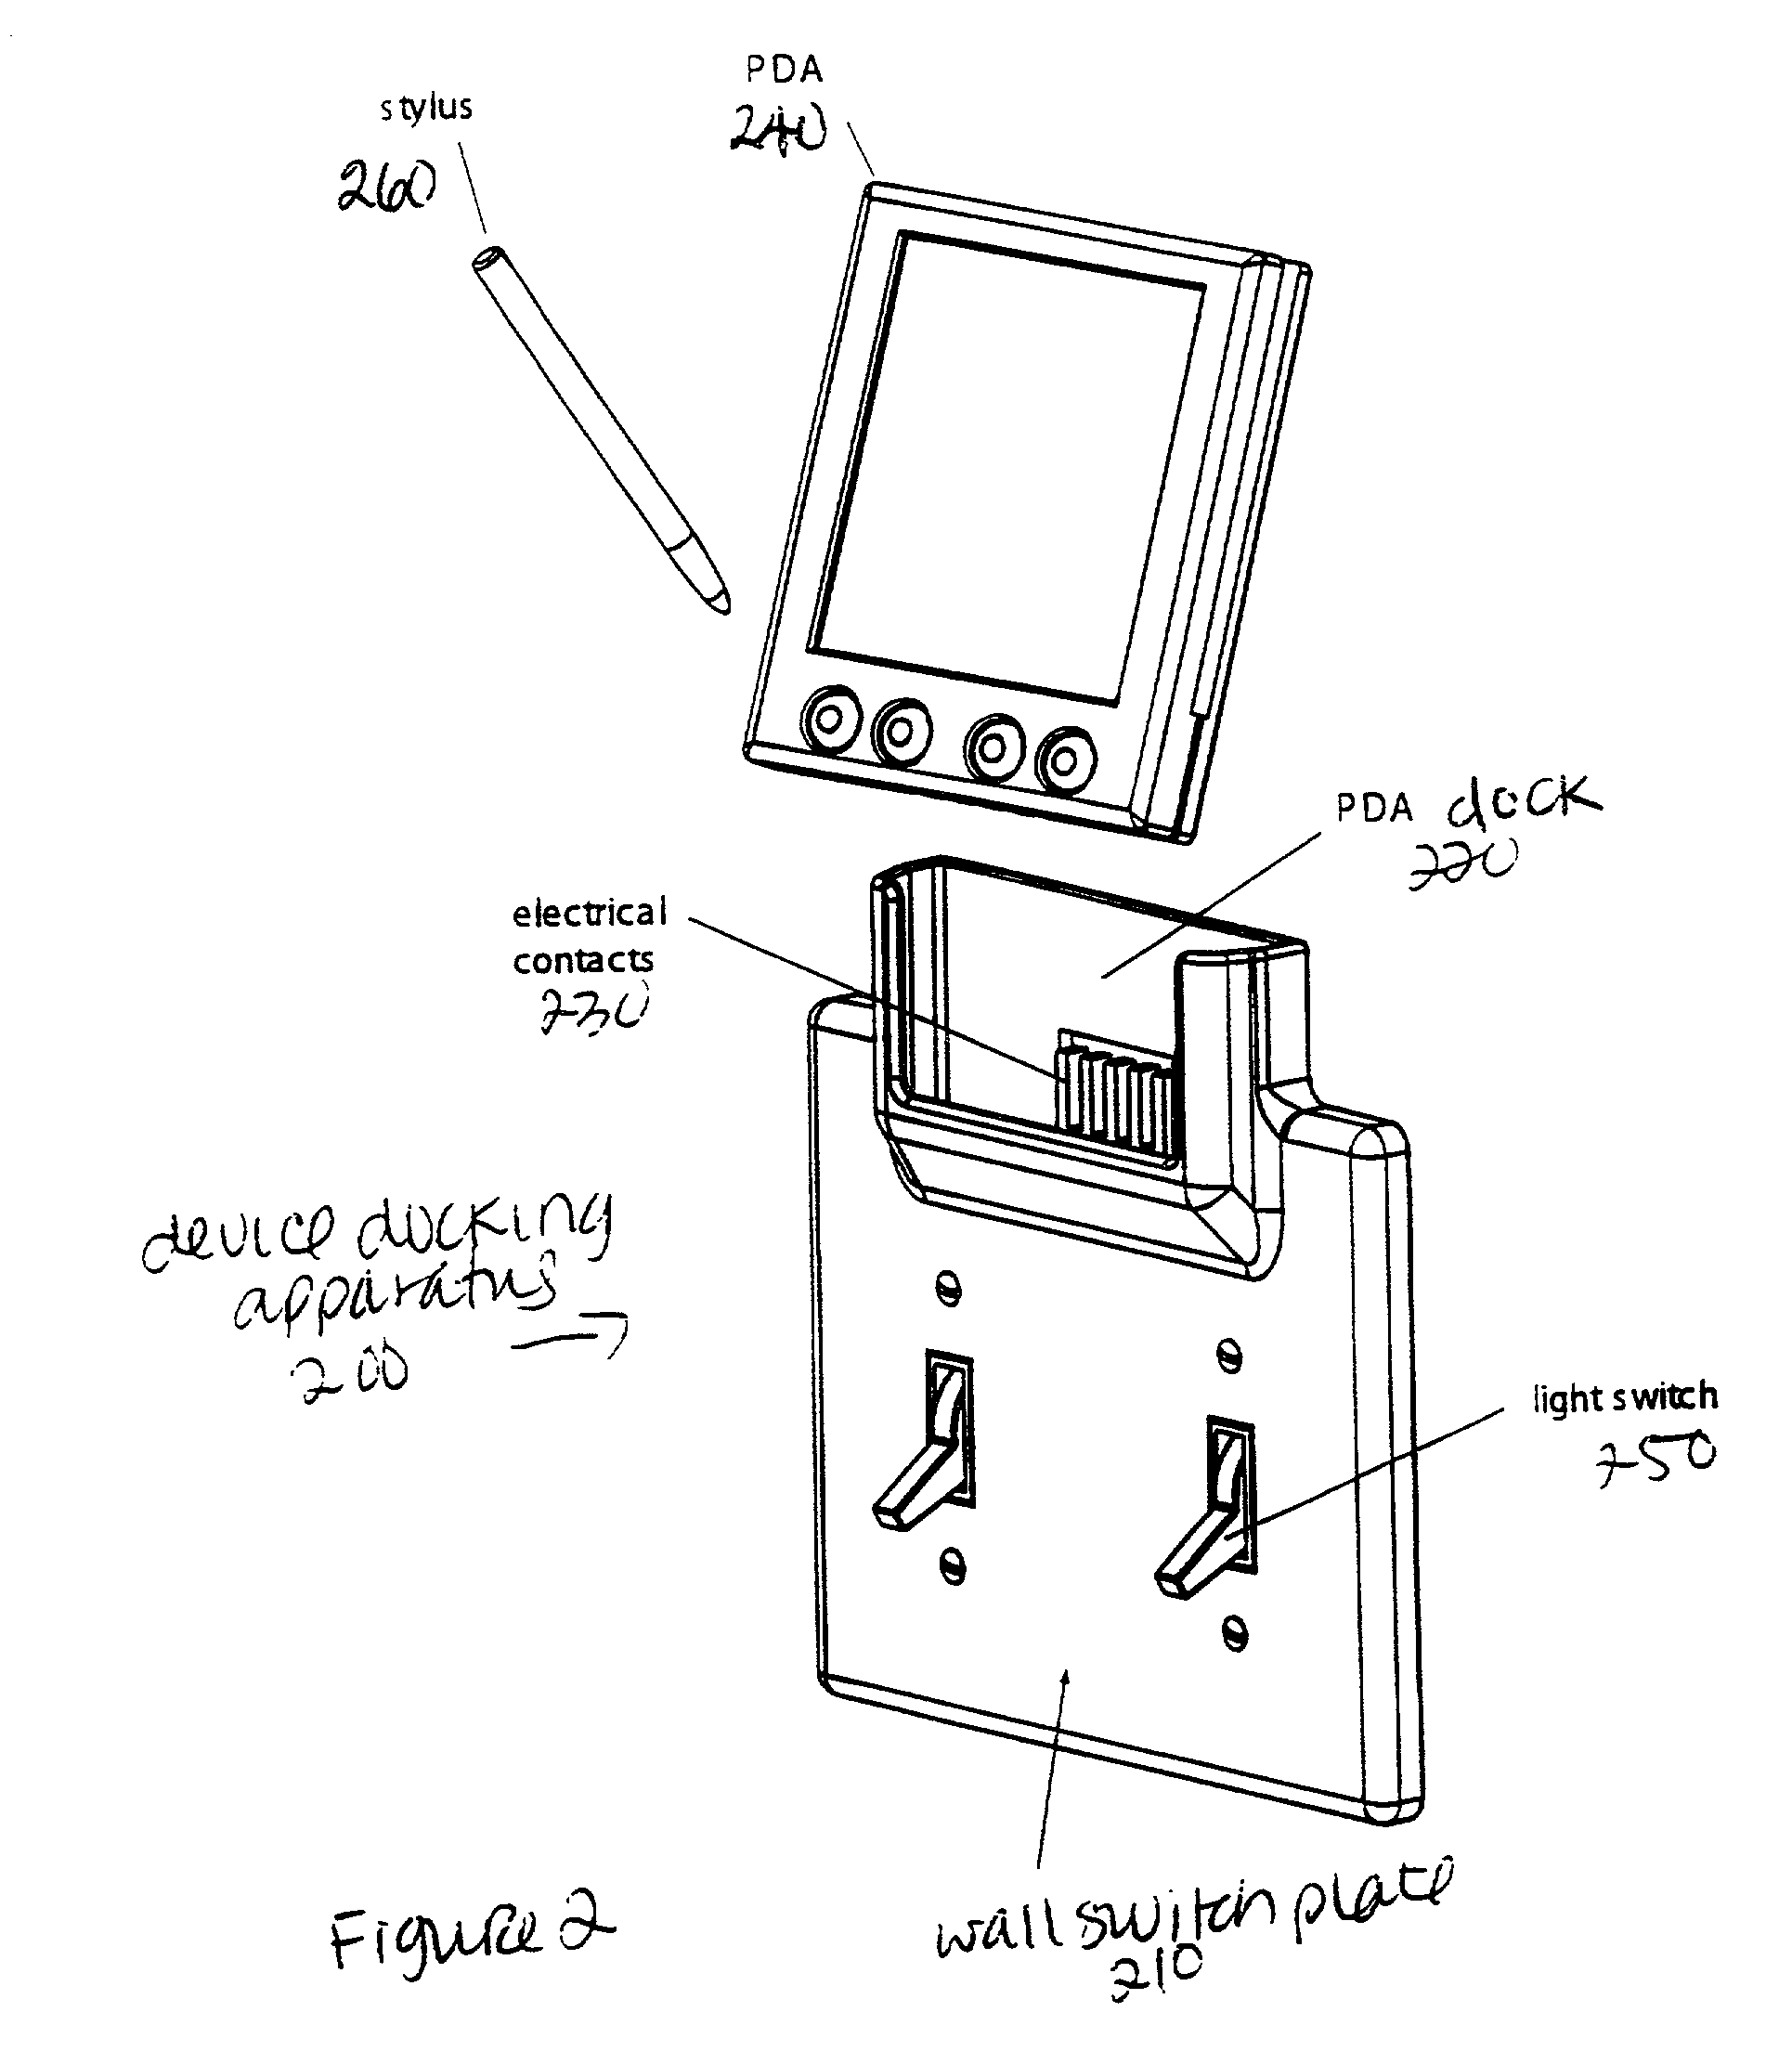 System including a wall switch device and a system including a power outlet device and methods for using the same